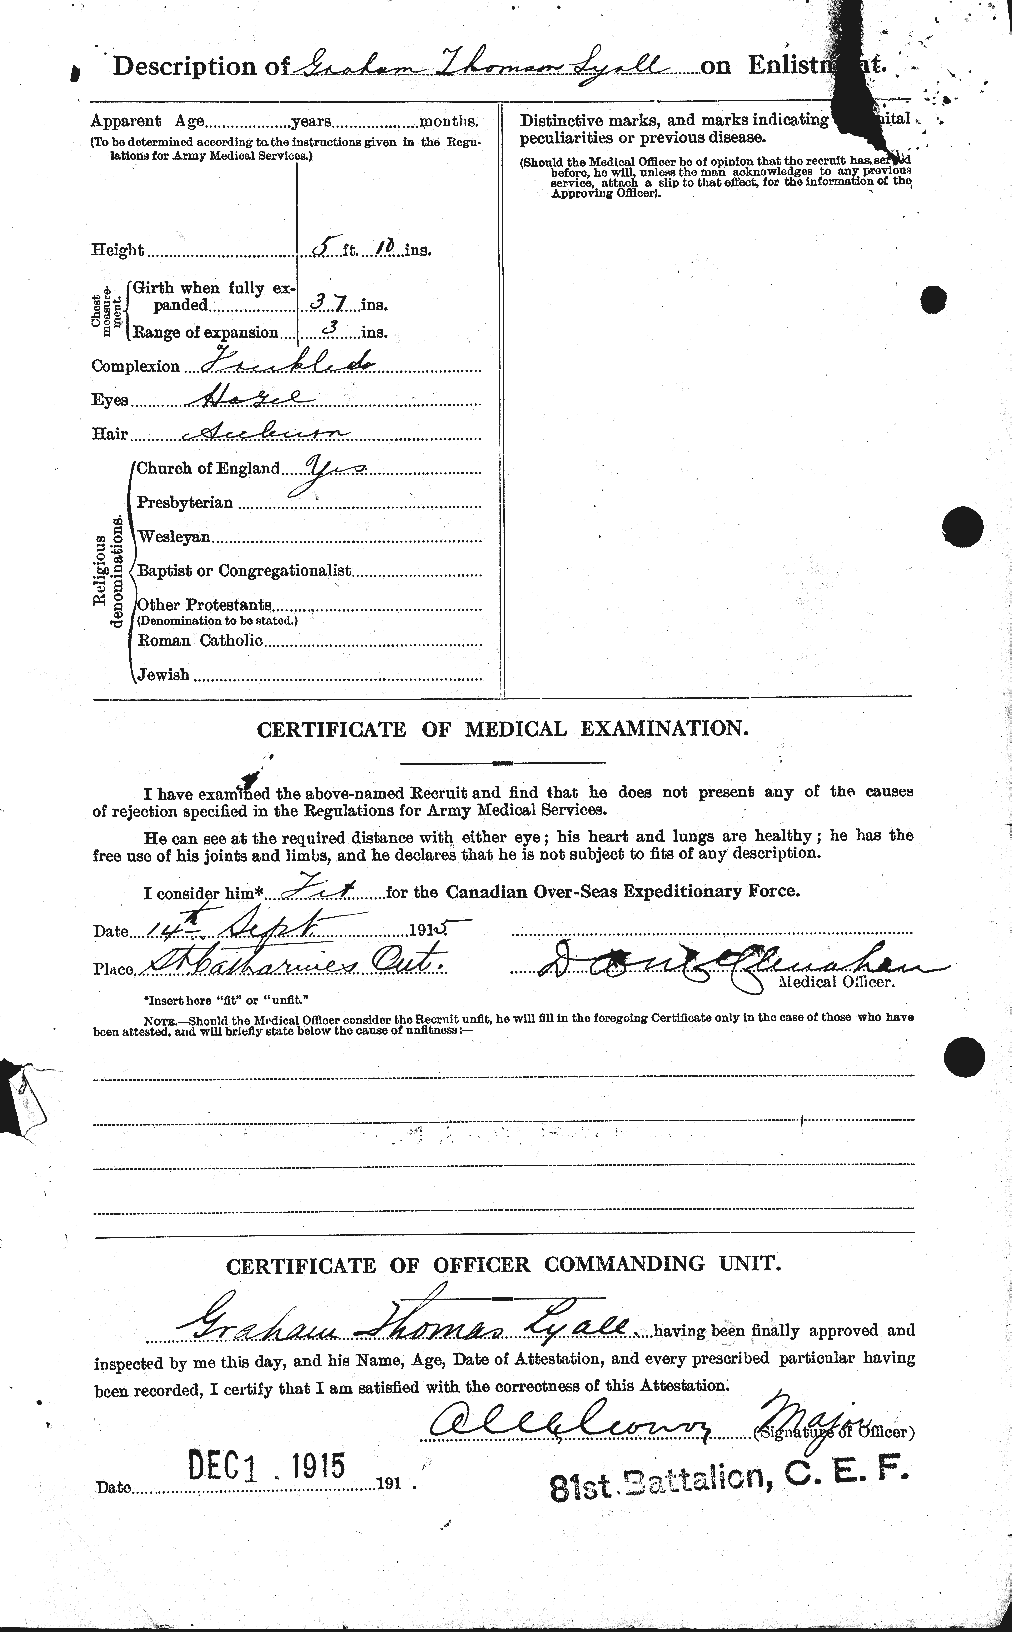 Personnel Records of the First World War - CEF 471663b